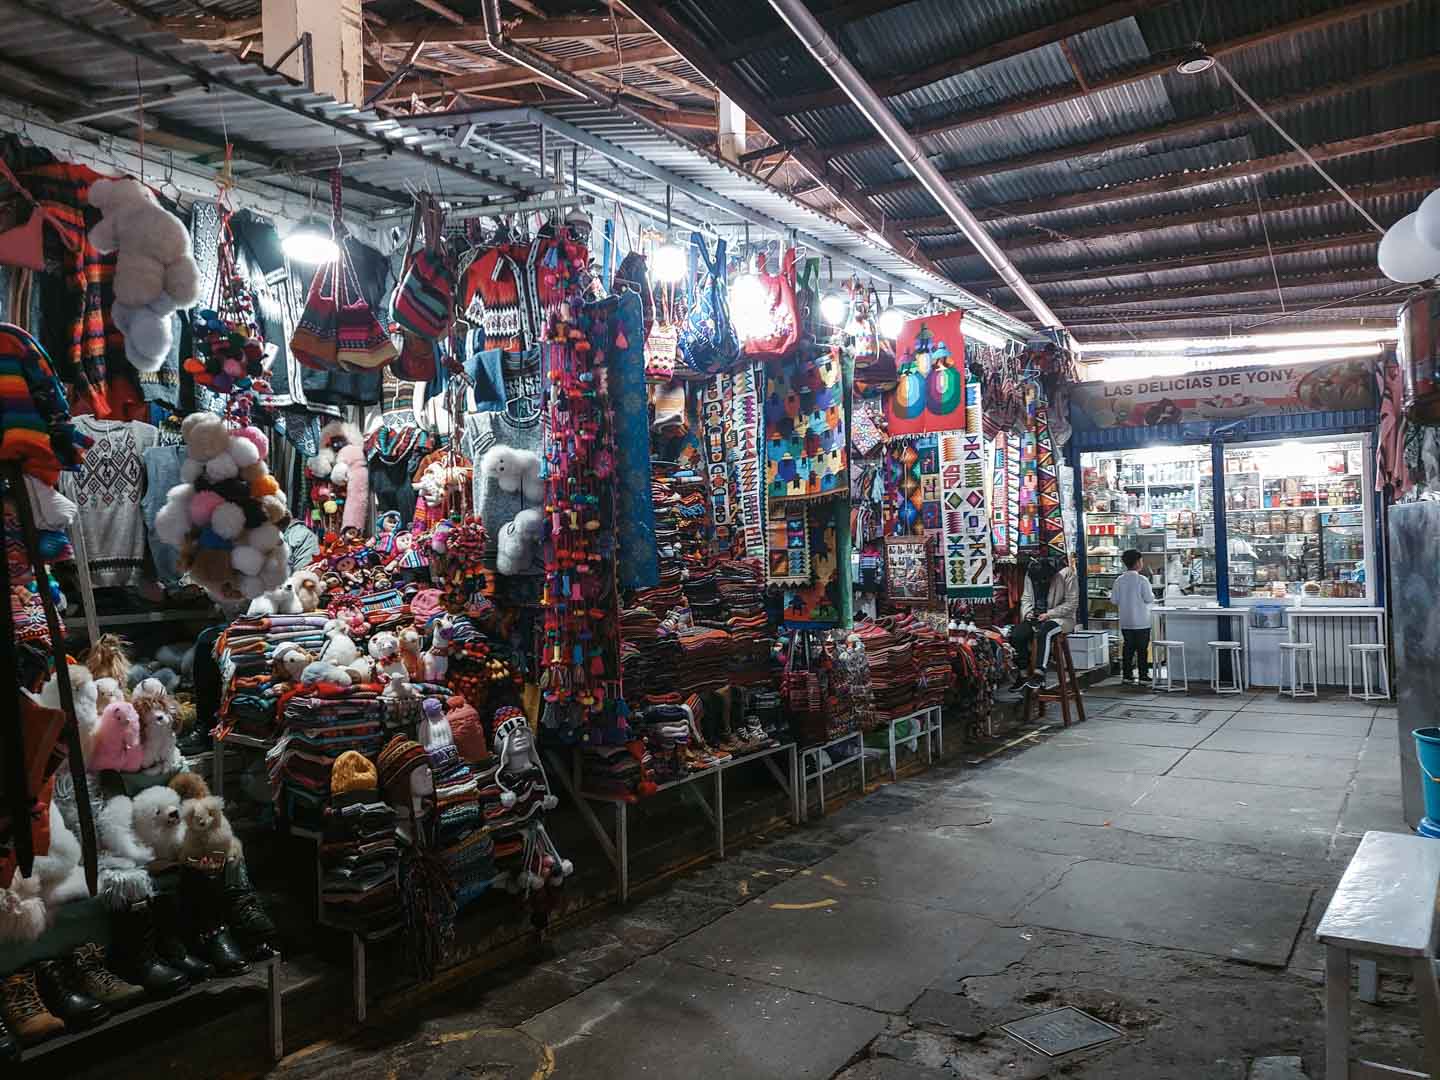 Haggling in a market, things to do in Cusco, Peru